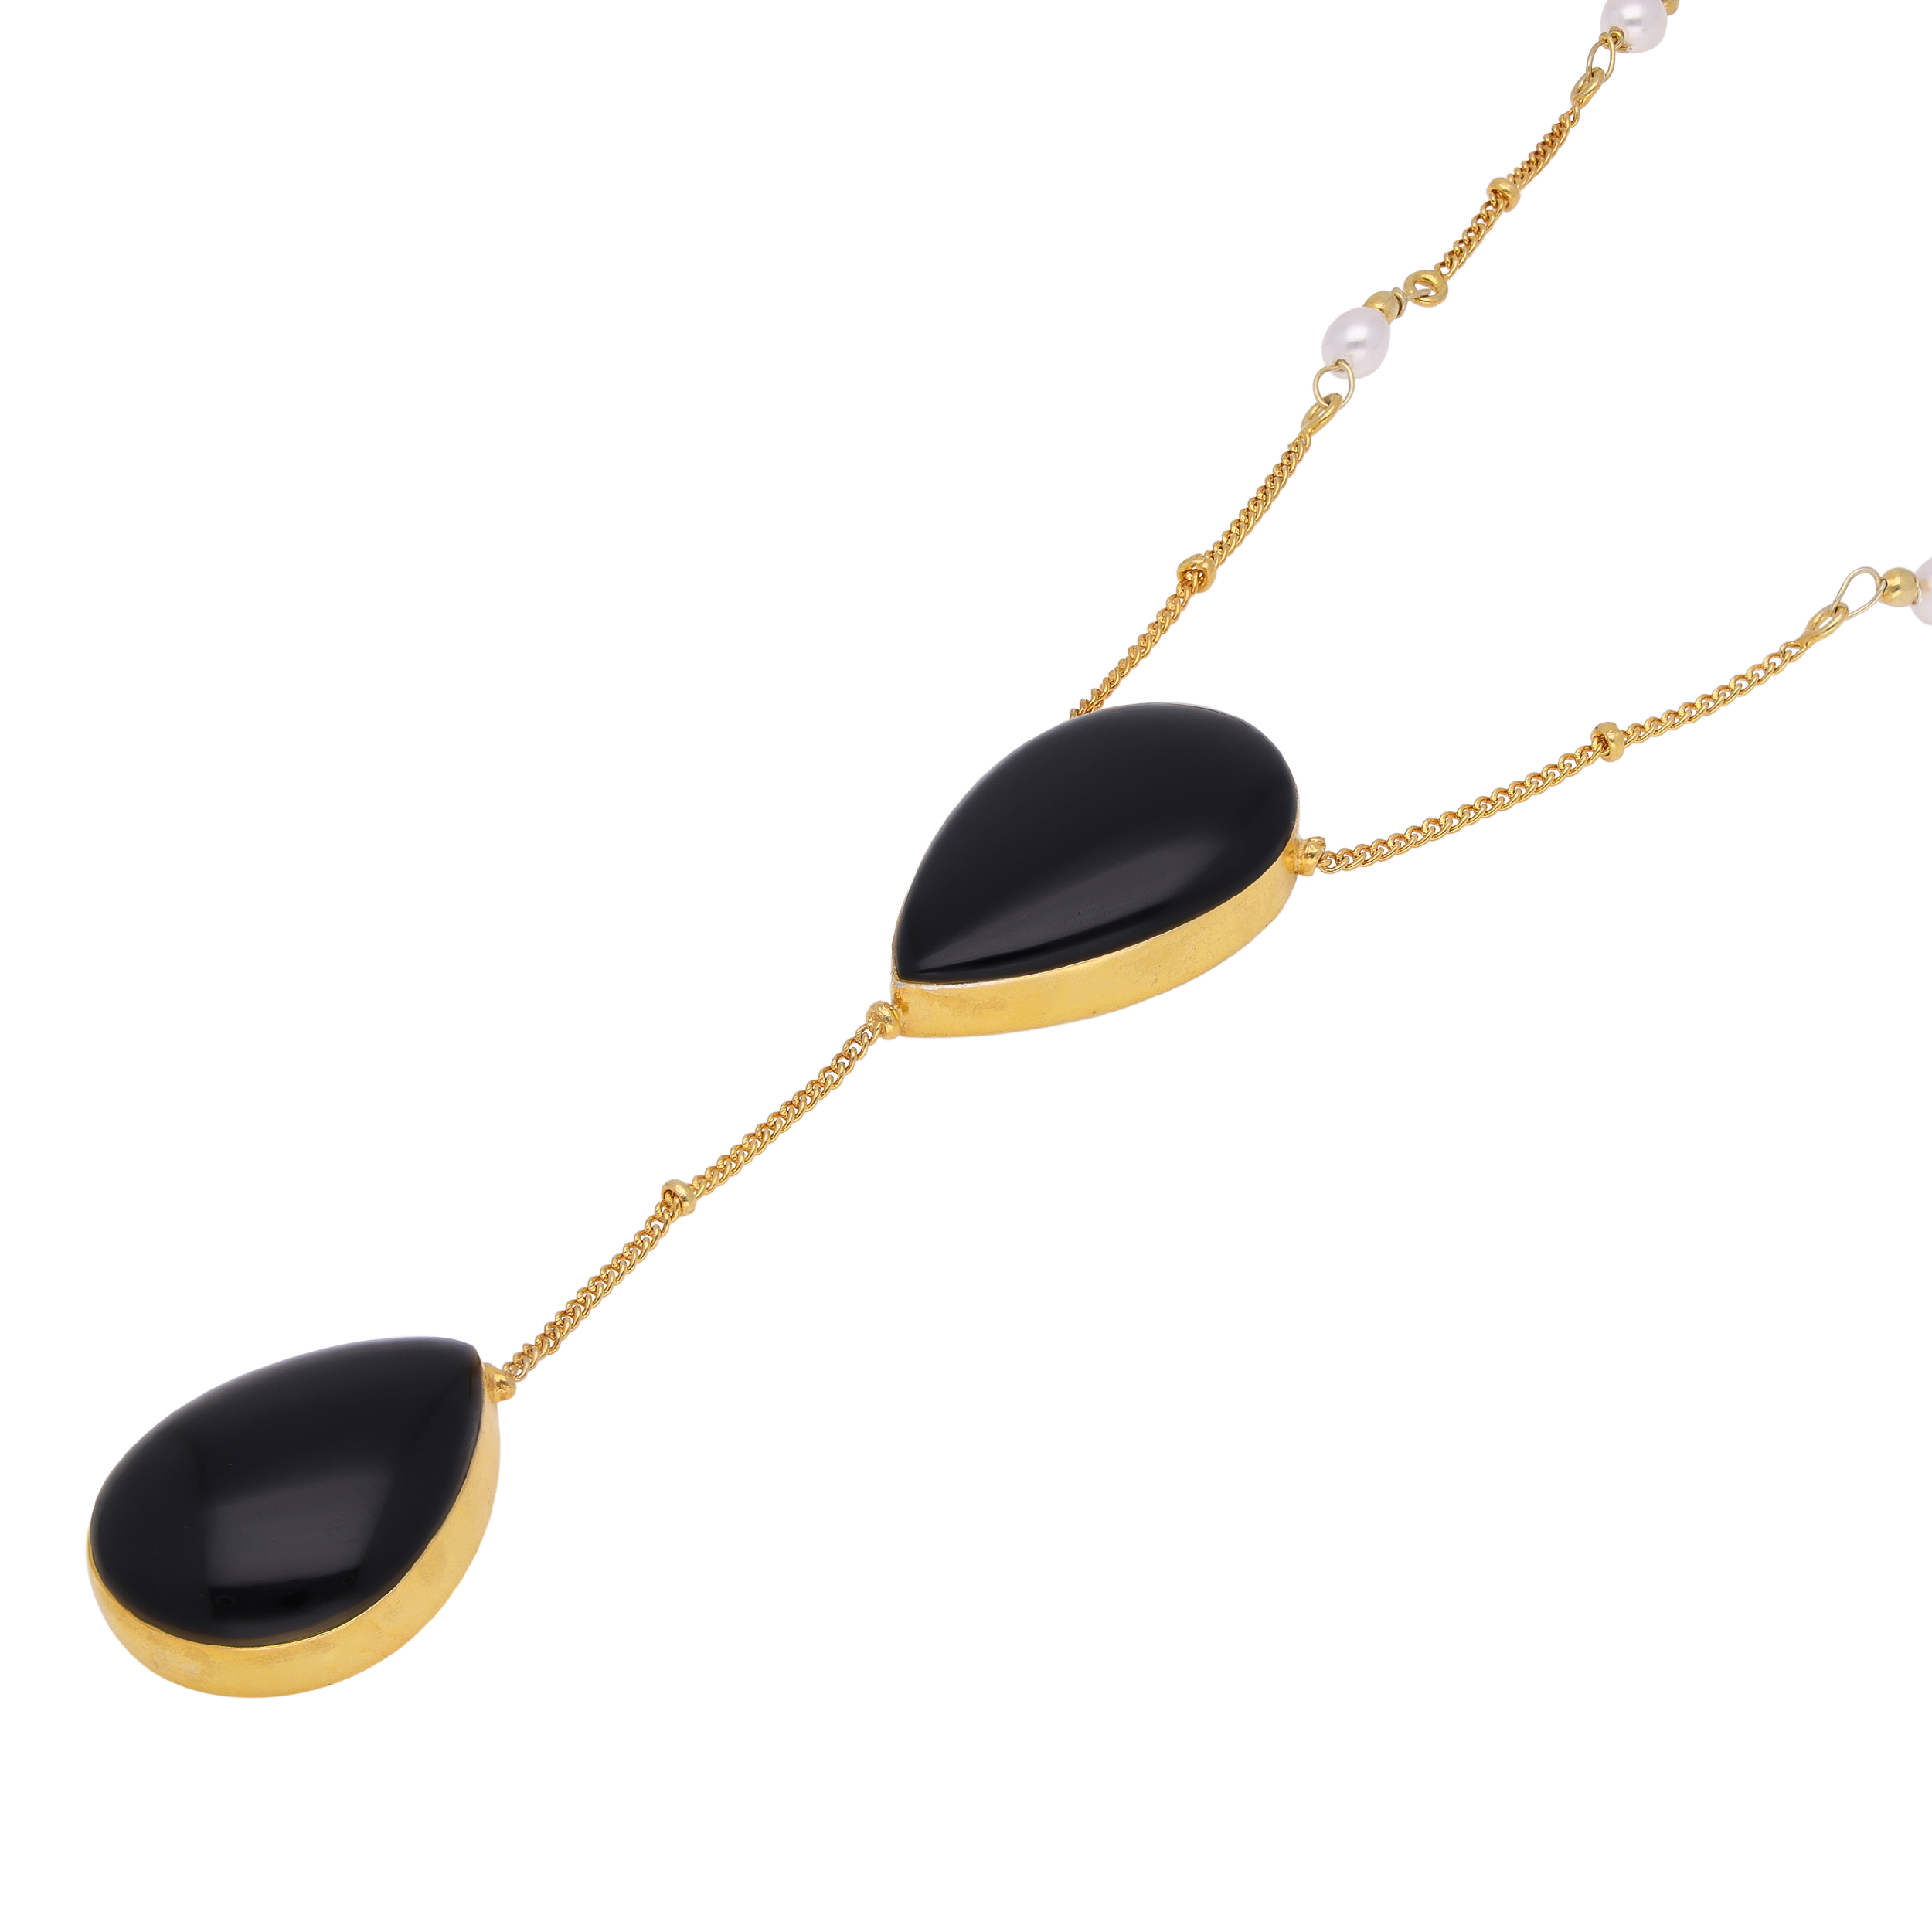 "Sophisticated Onyx Teardrop and Sterling Silver Beaded Necklace | SKU: 0019586106, 0019585970, 0019586069, 0019586083